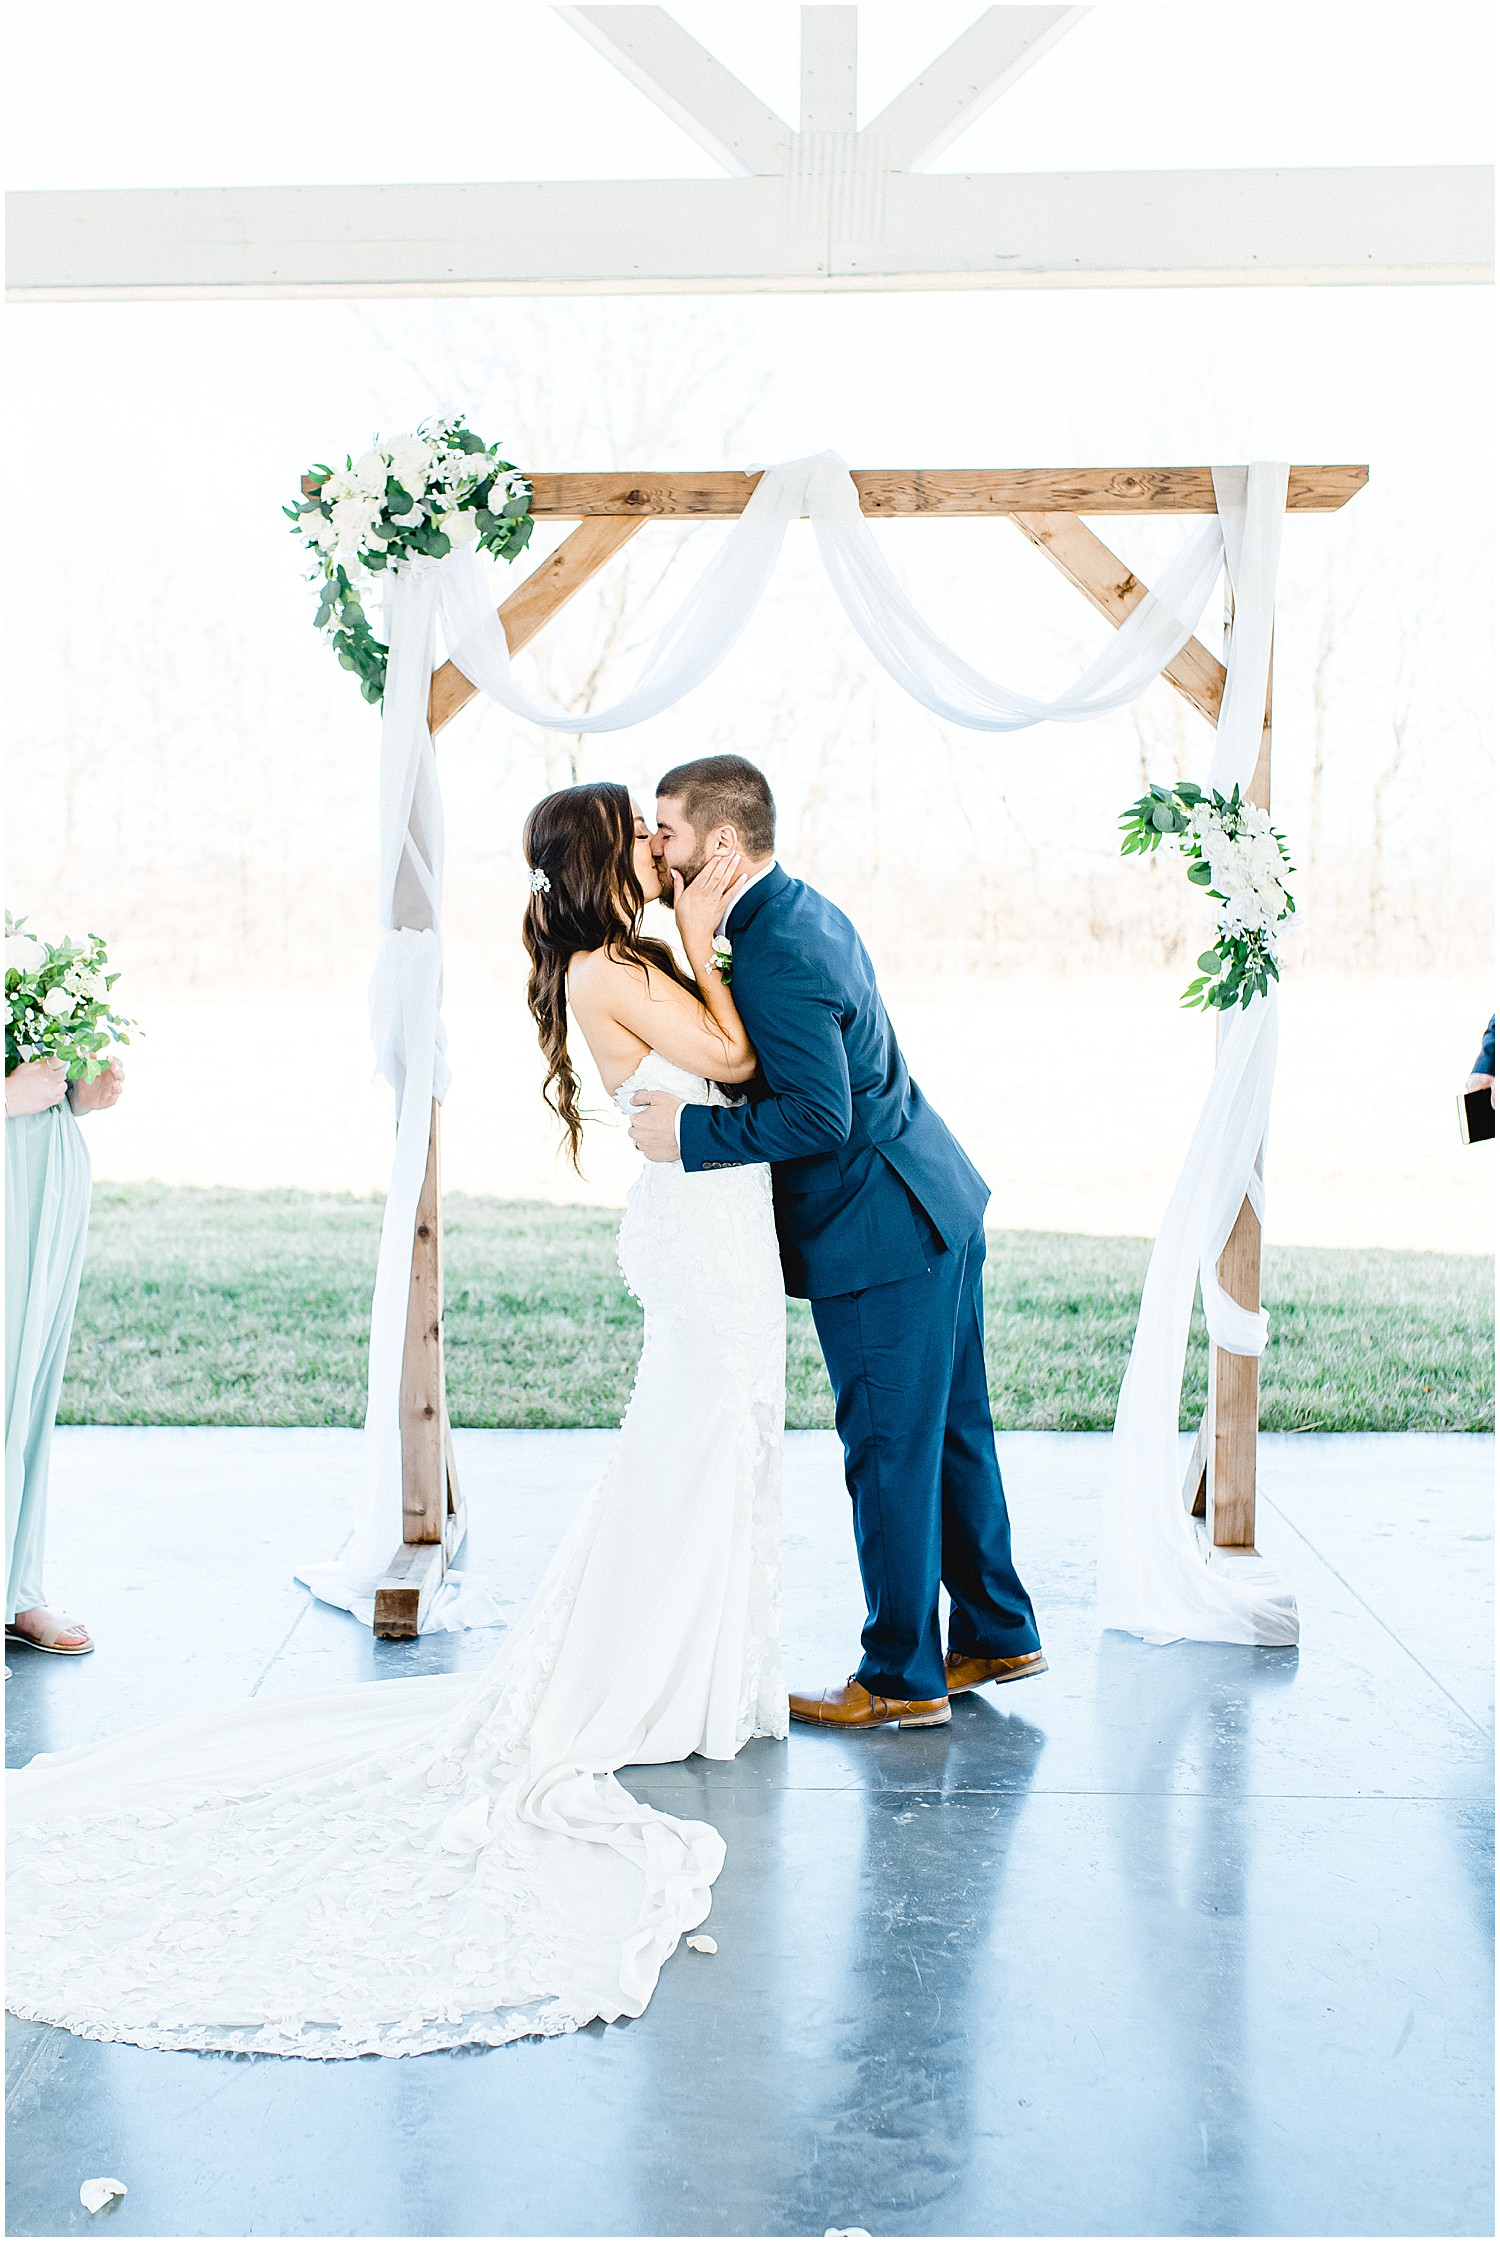 Bride and groom first kiss Ceremony photos in outdoor pavilion at Emerson Fields wedding venue